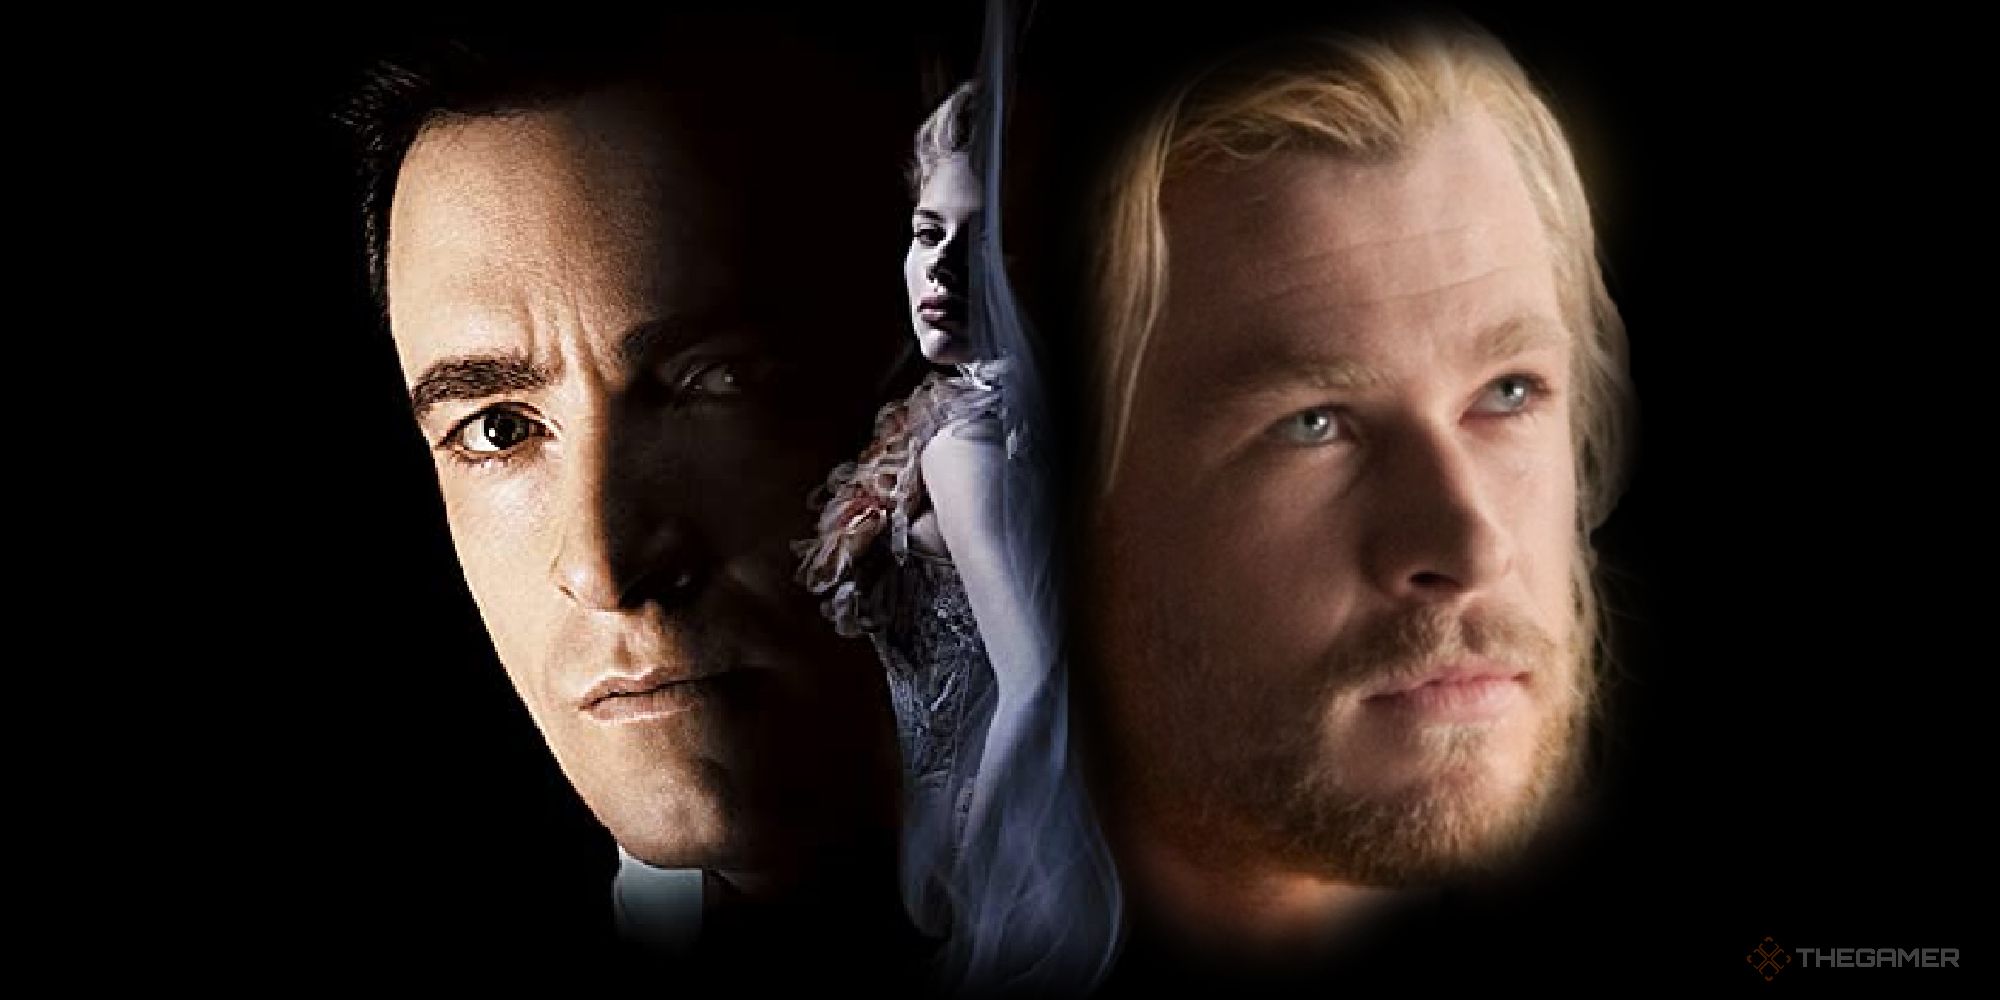 Thor's face on The Prestige poster